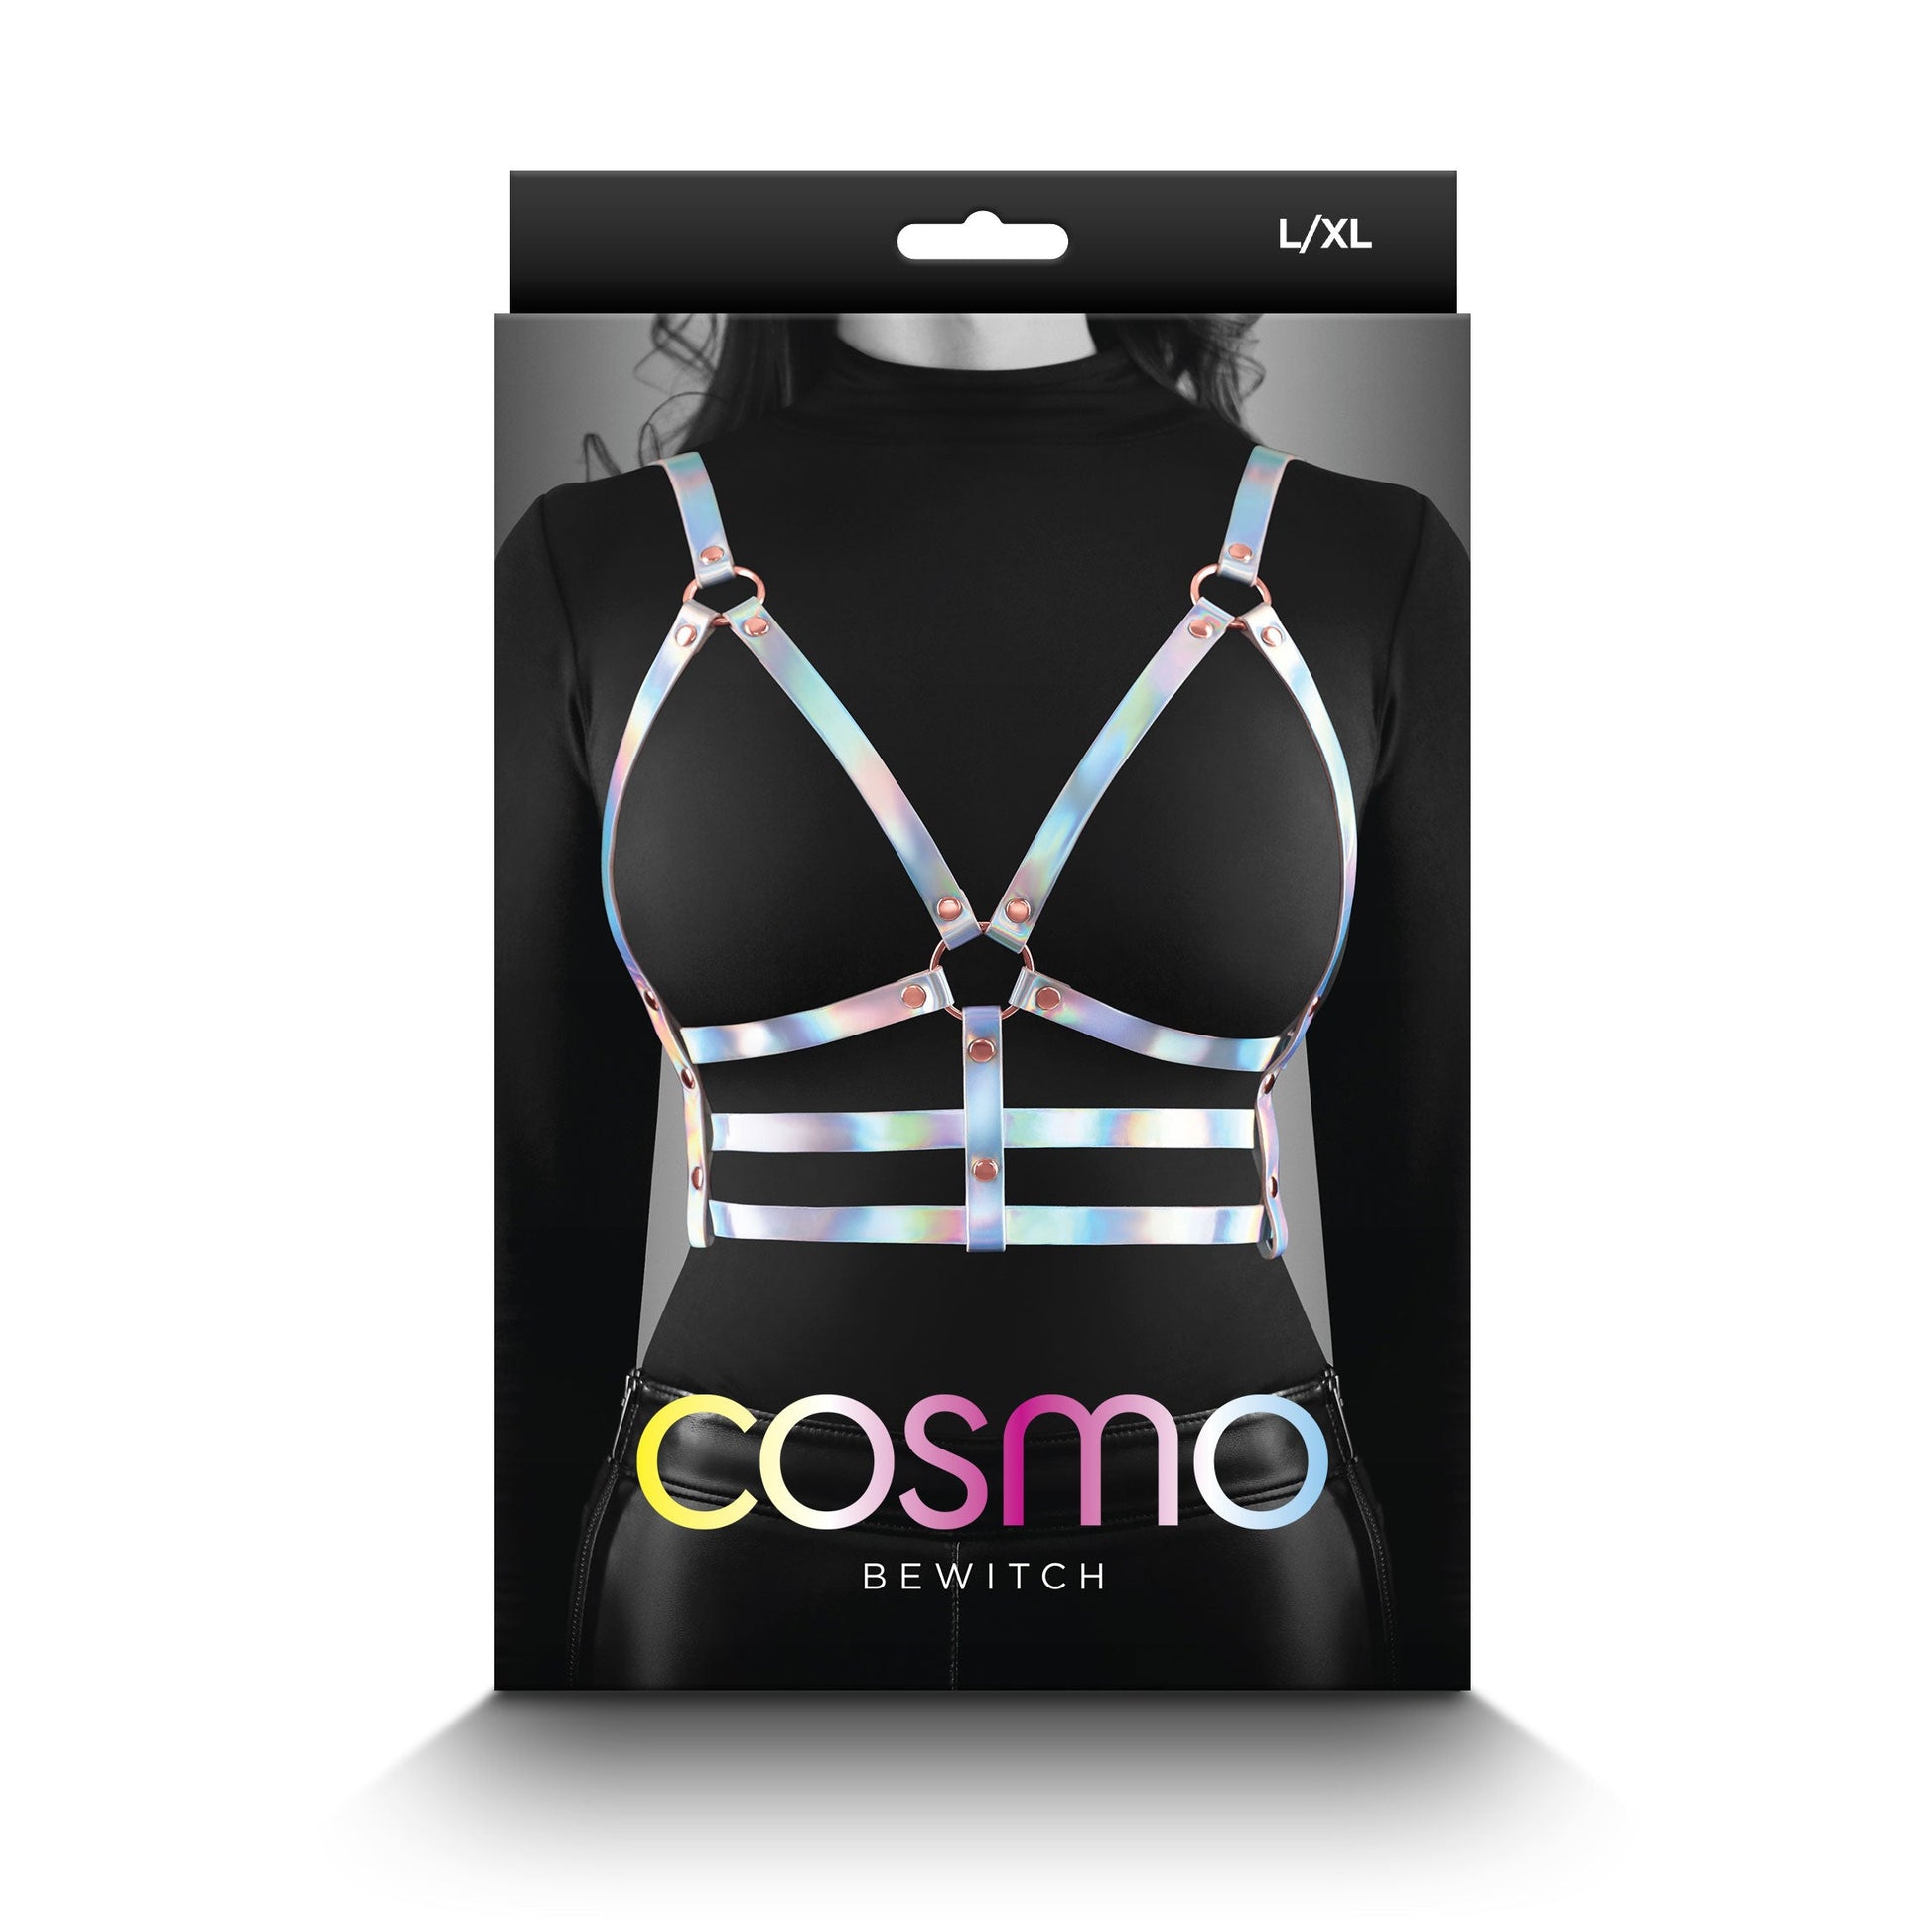 Cosmo Harness - Bewitch - Large/xlarge - Rainbow